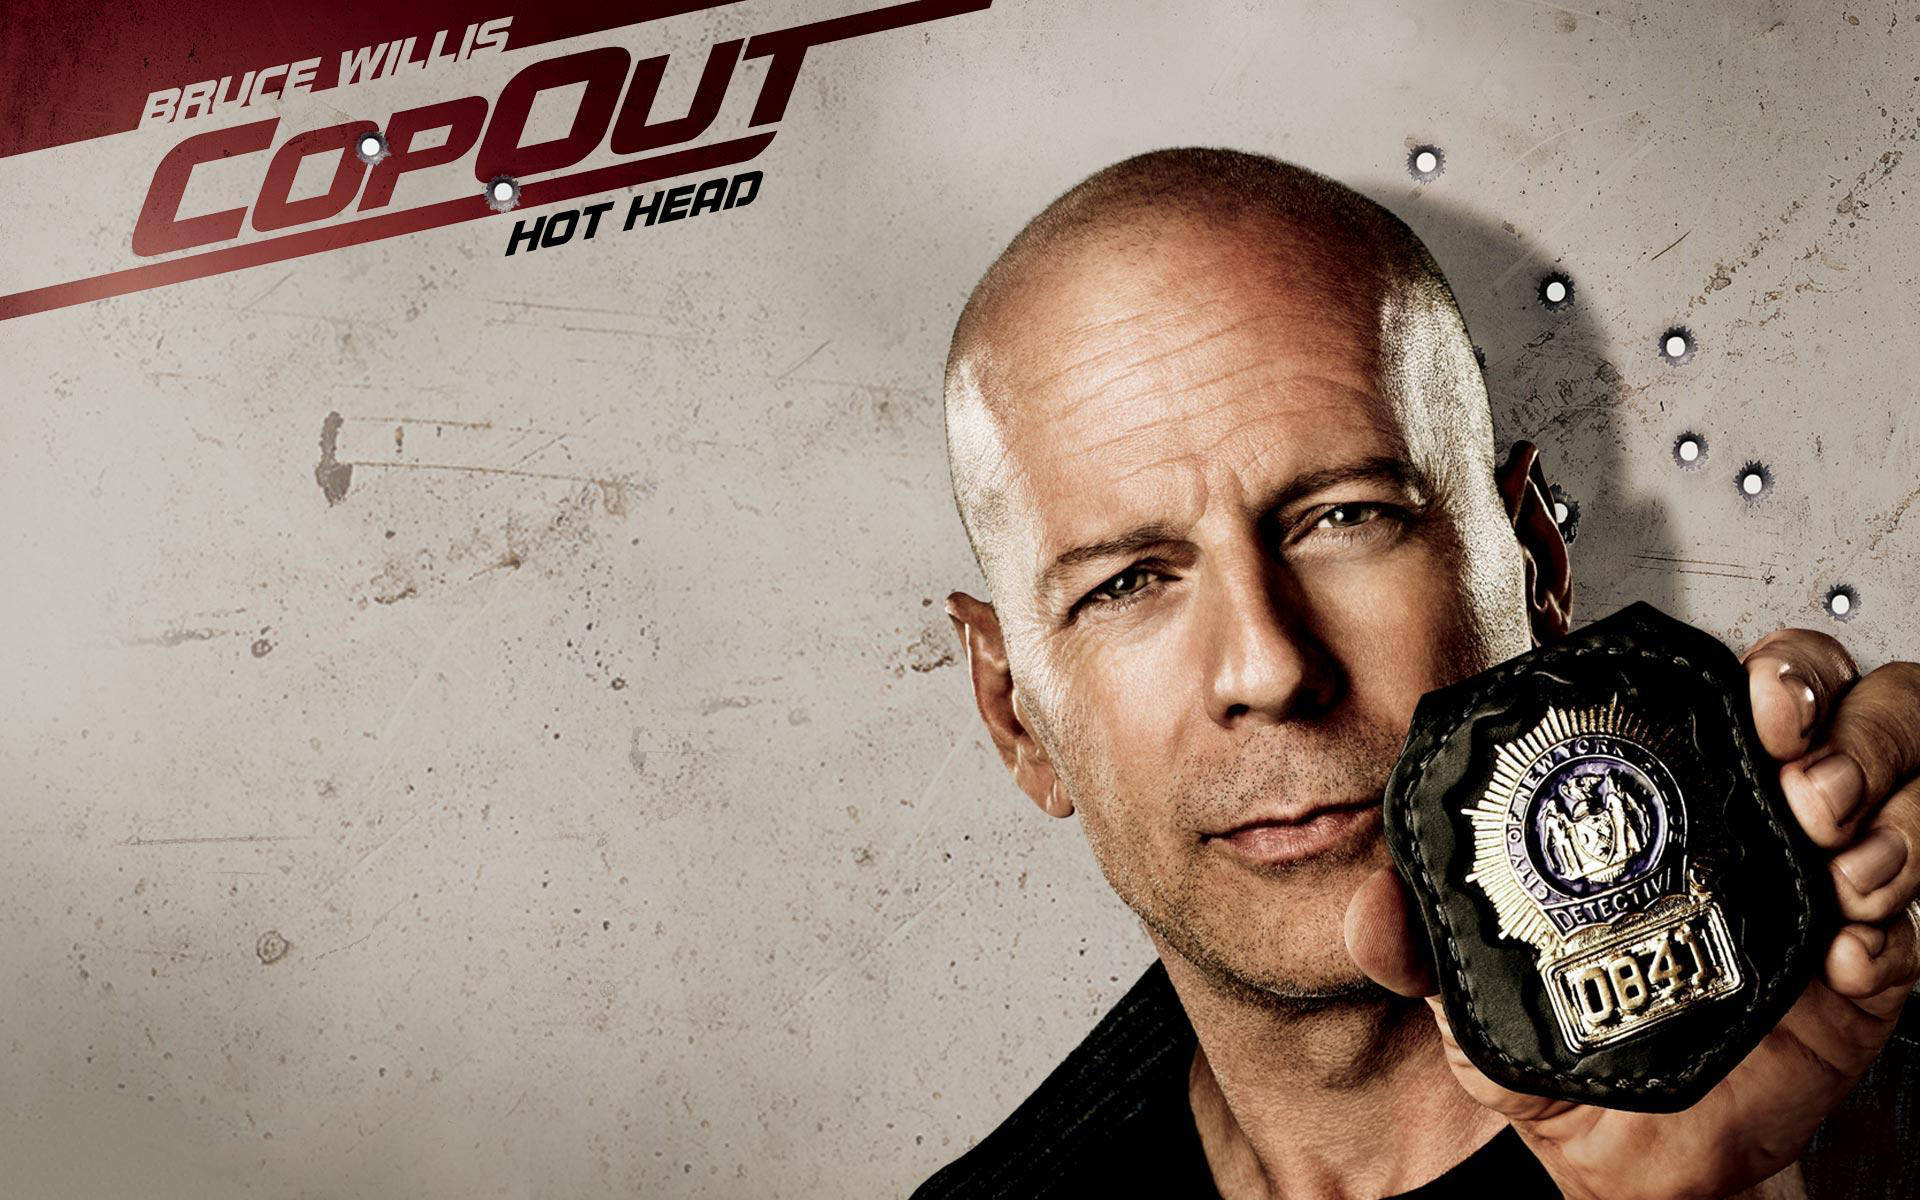 Bruce Willis Cop Out Poster Background